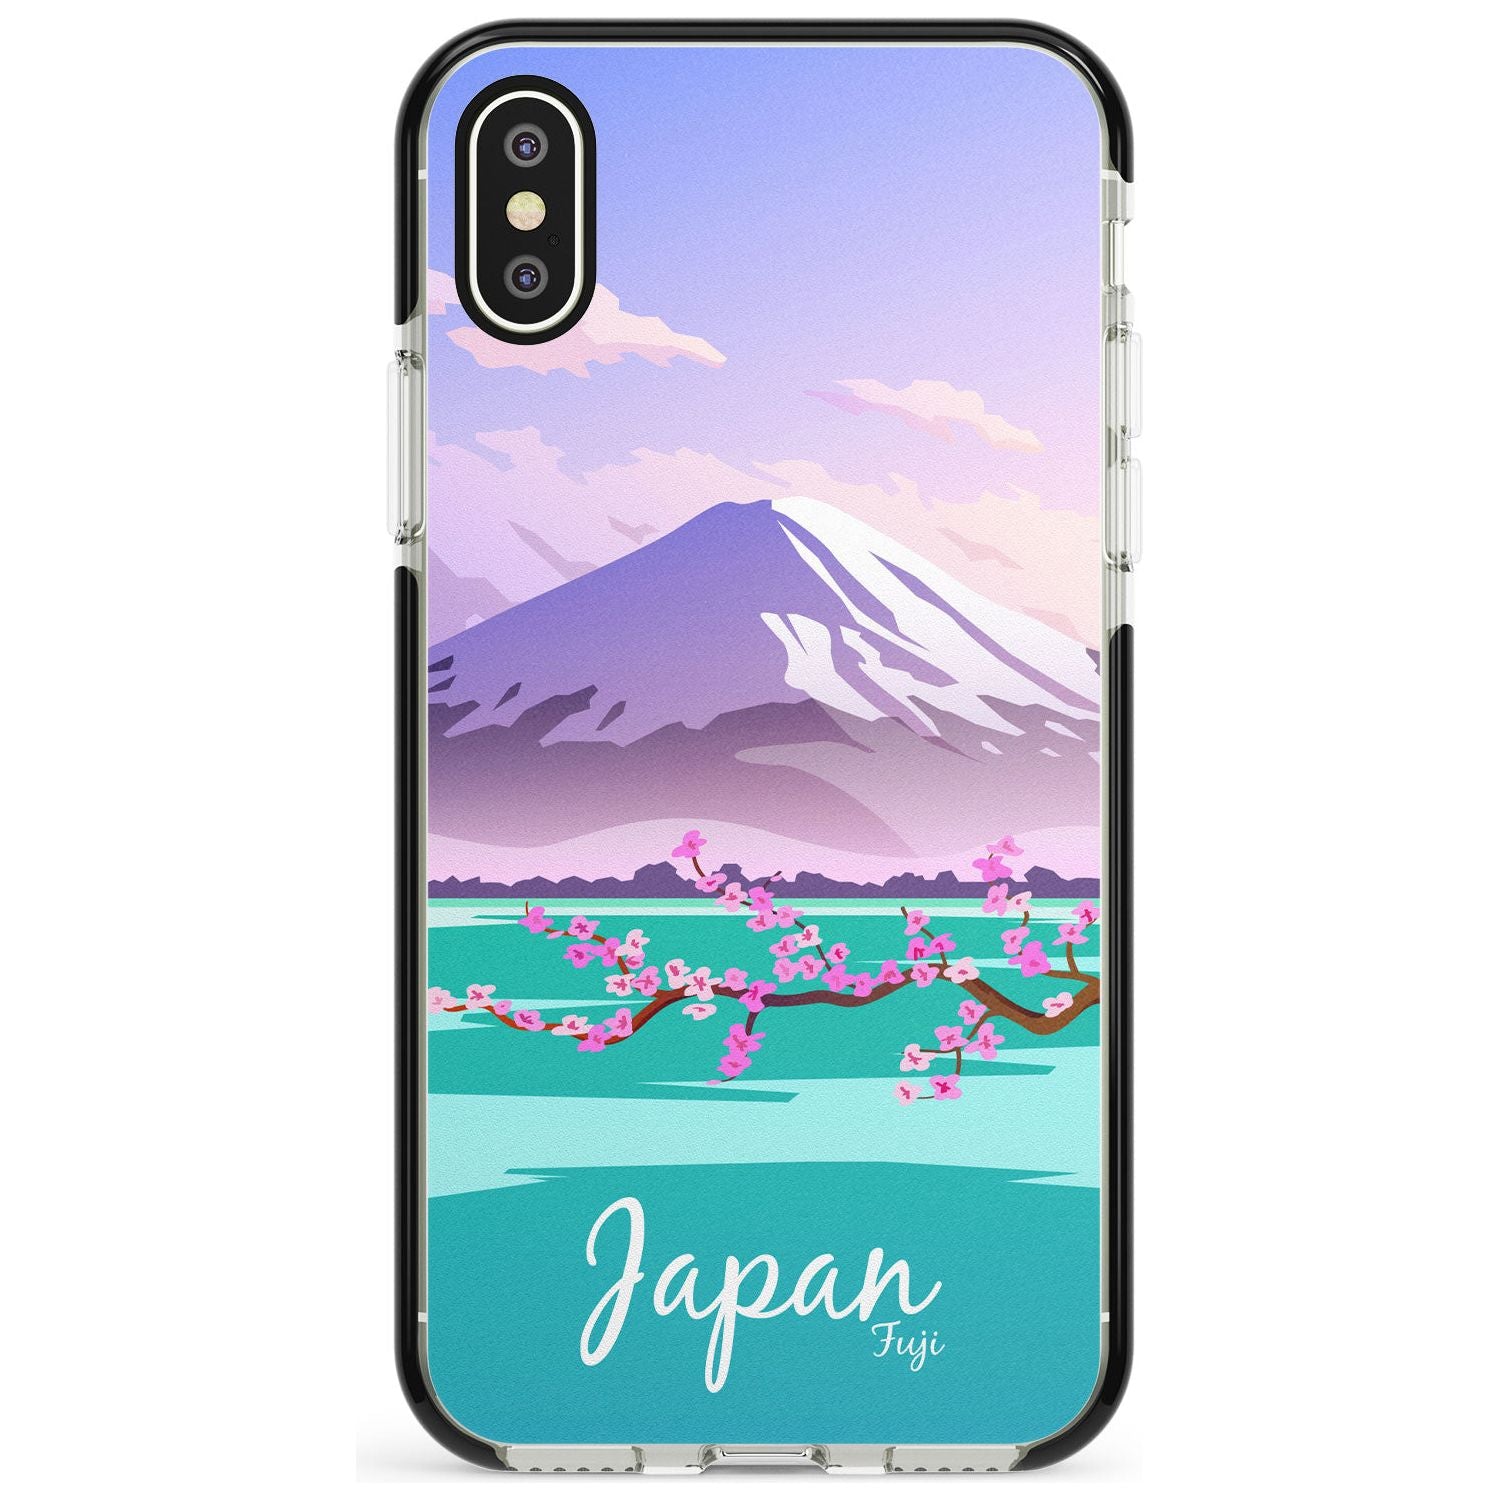 Vintage Travel Poster Japan Black Impact Phone Case for iPhone X XS Max XR